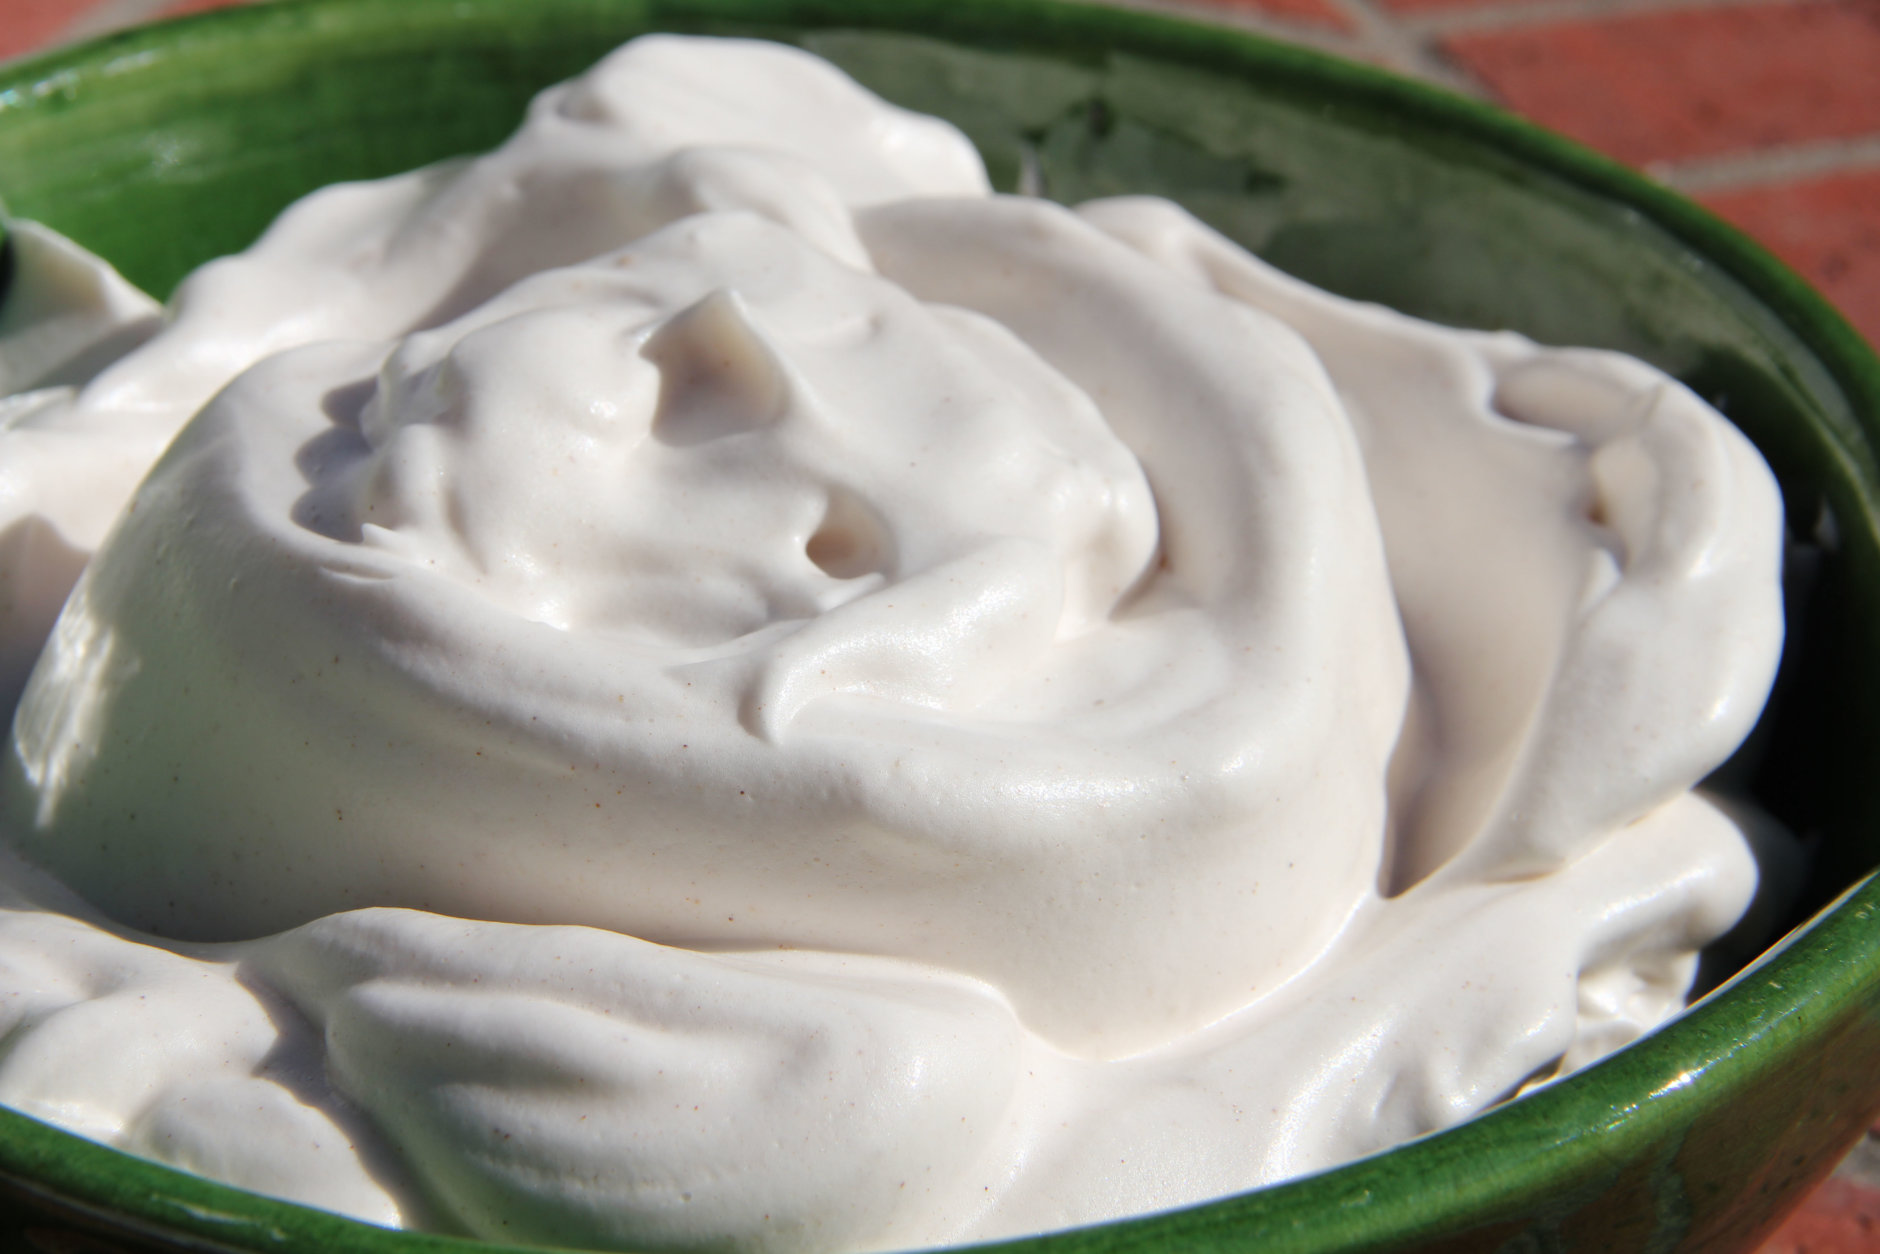 This Oct. 20, 2016 photo shows a natural, lower calorie whipped cream substitute in Coronado, Calif. It's made with the liquid leftover from the slow cooking of beans and legumes called "aquafaba" which can be whipped up into a pillowy fluff in minutes. This dish is from a recipe by Melissa d'Arabian. (Melissa d'Arabian via AP)